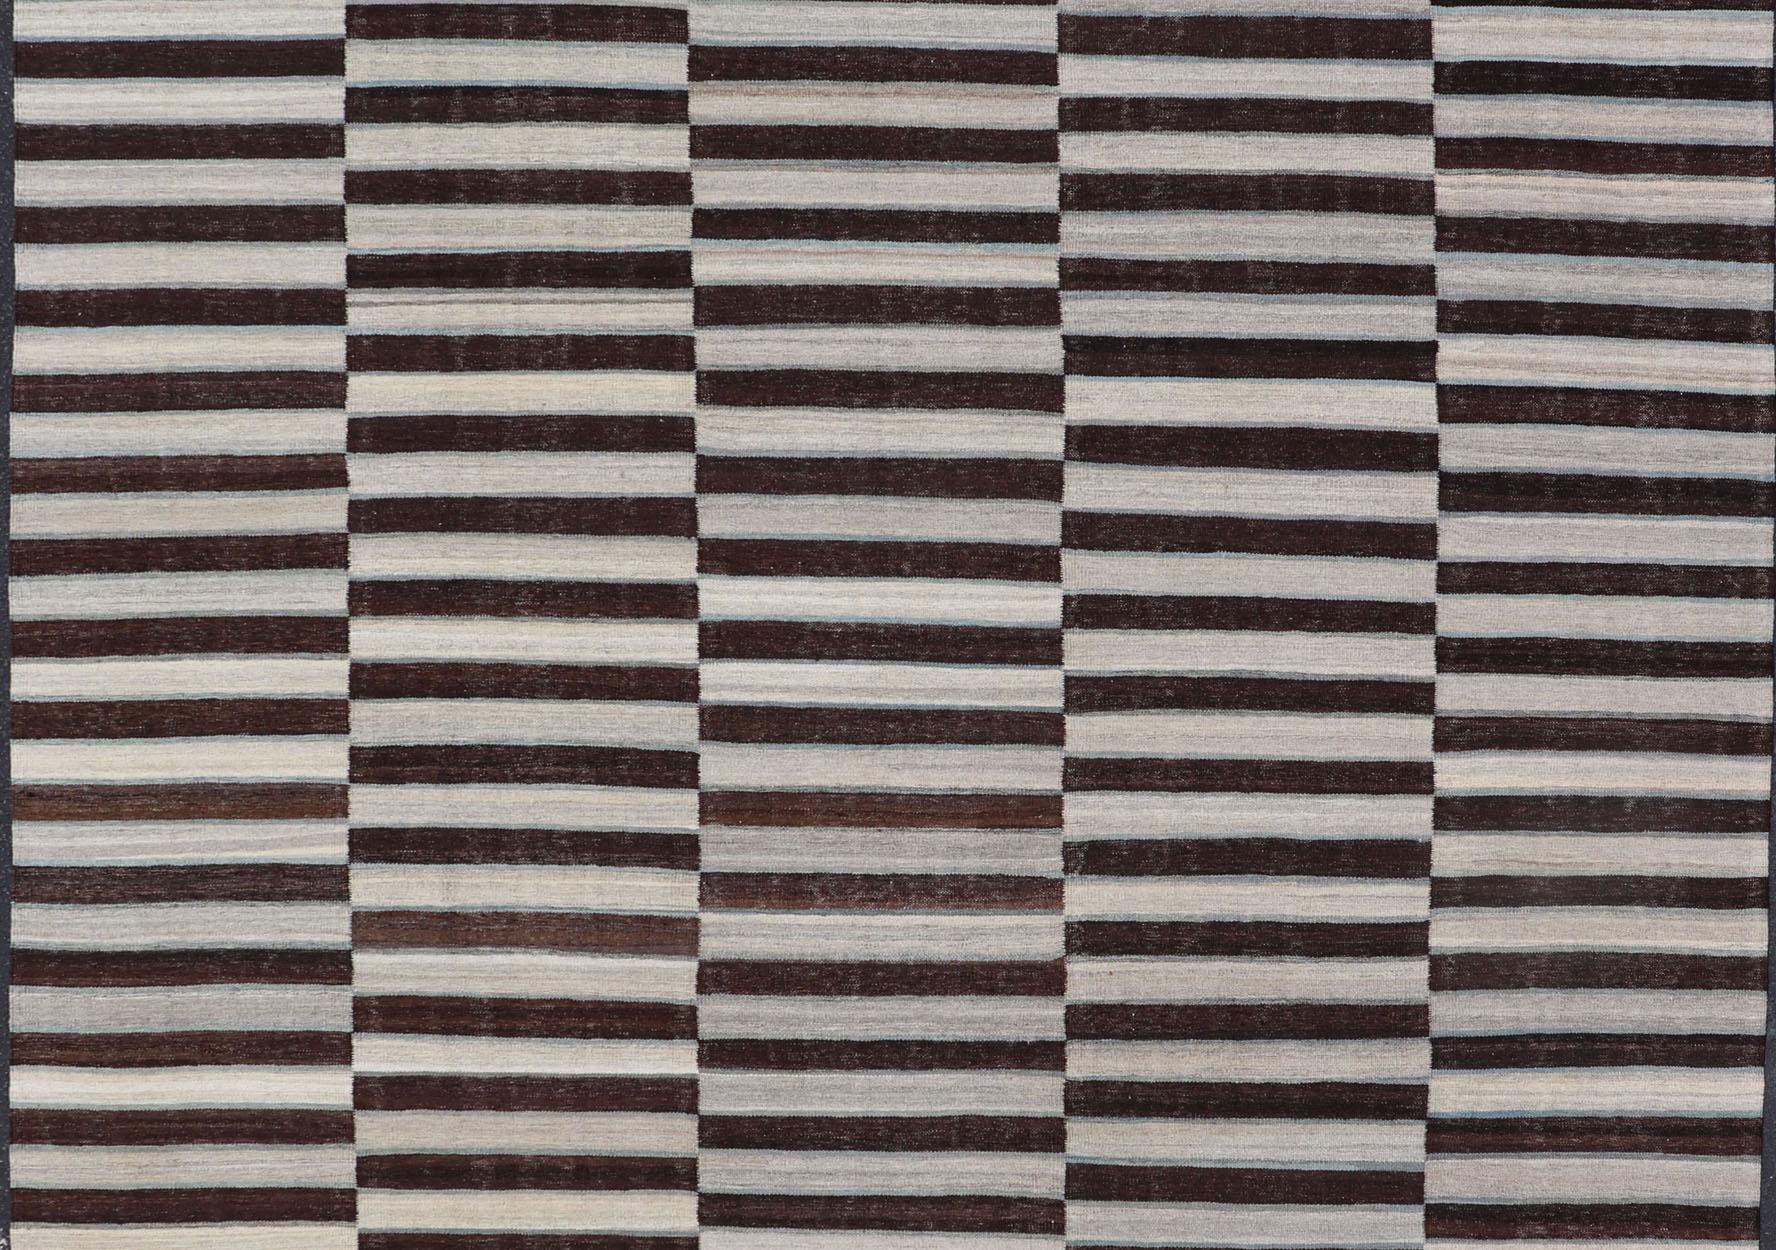 Afghan Modern Kilim Rug in Multi-Panel Striped Design with Chocolate Brown, cream  For Sale